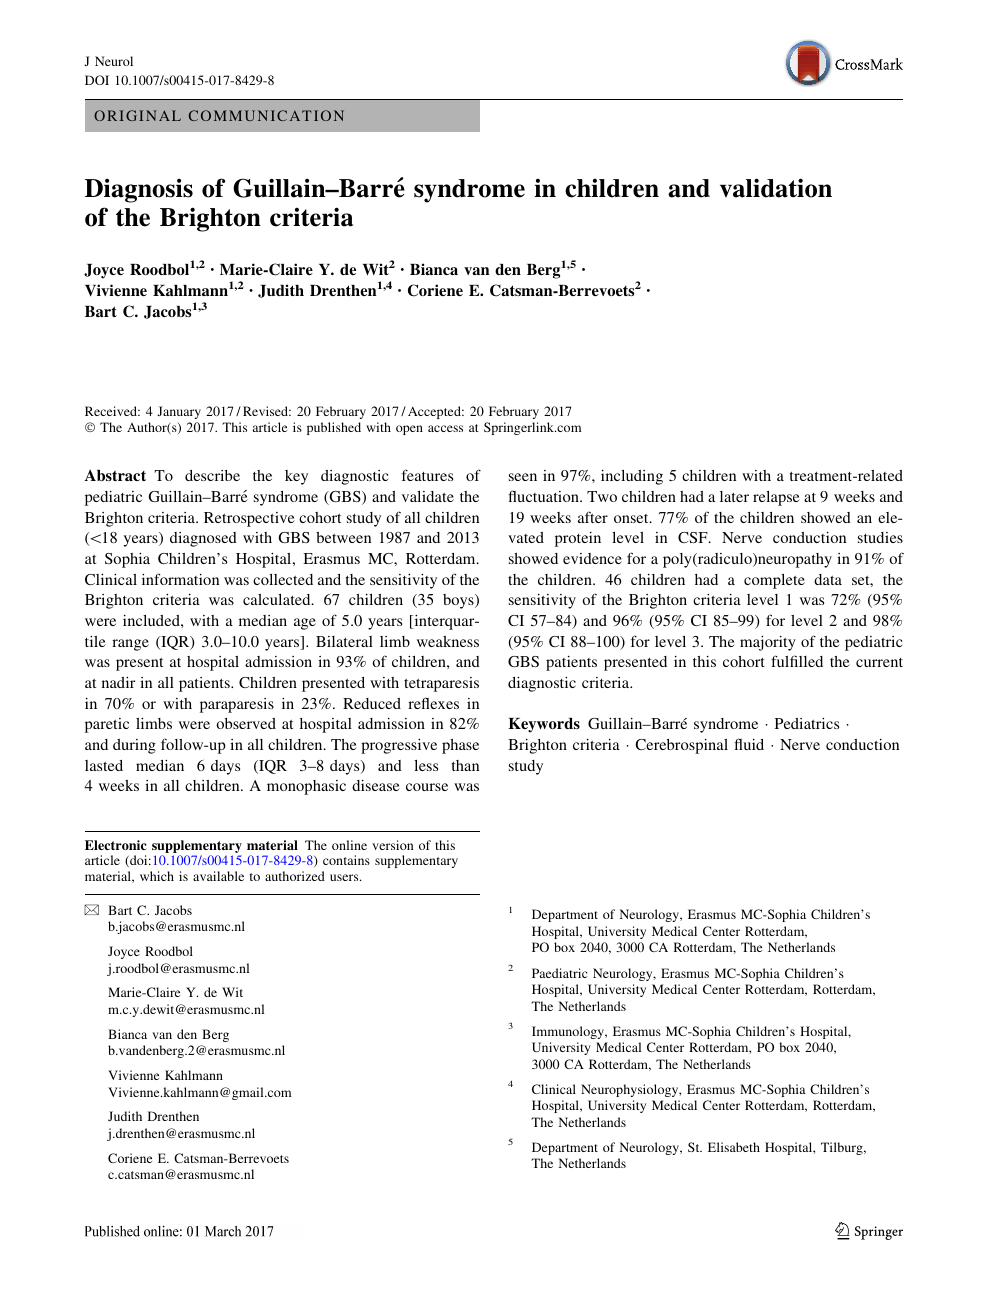 Diagnosis Of Guillain Barre Syndrome In Children And Validation Of The Brighton Criteria Topic Of Research Paper In Clinical Medicine Download Scholarly Article Pdf And Read For Free On Cyberleninka Open Science